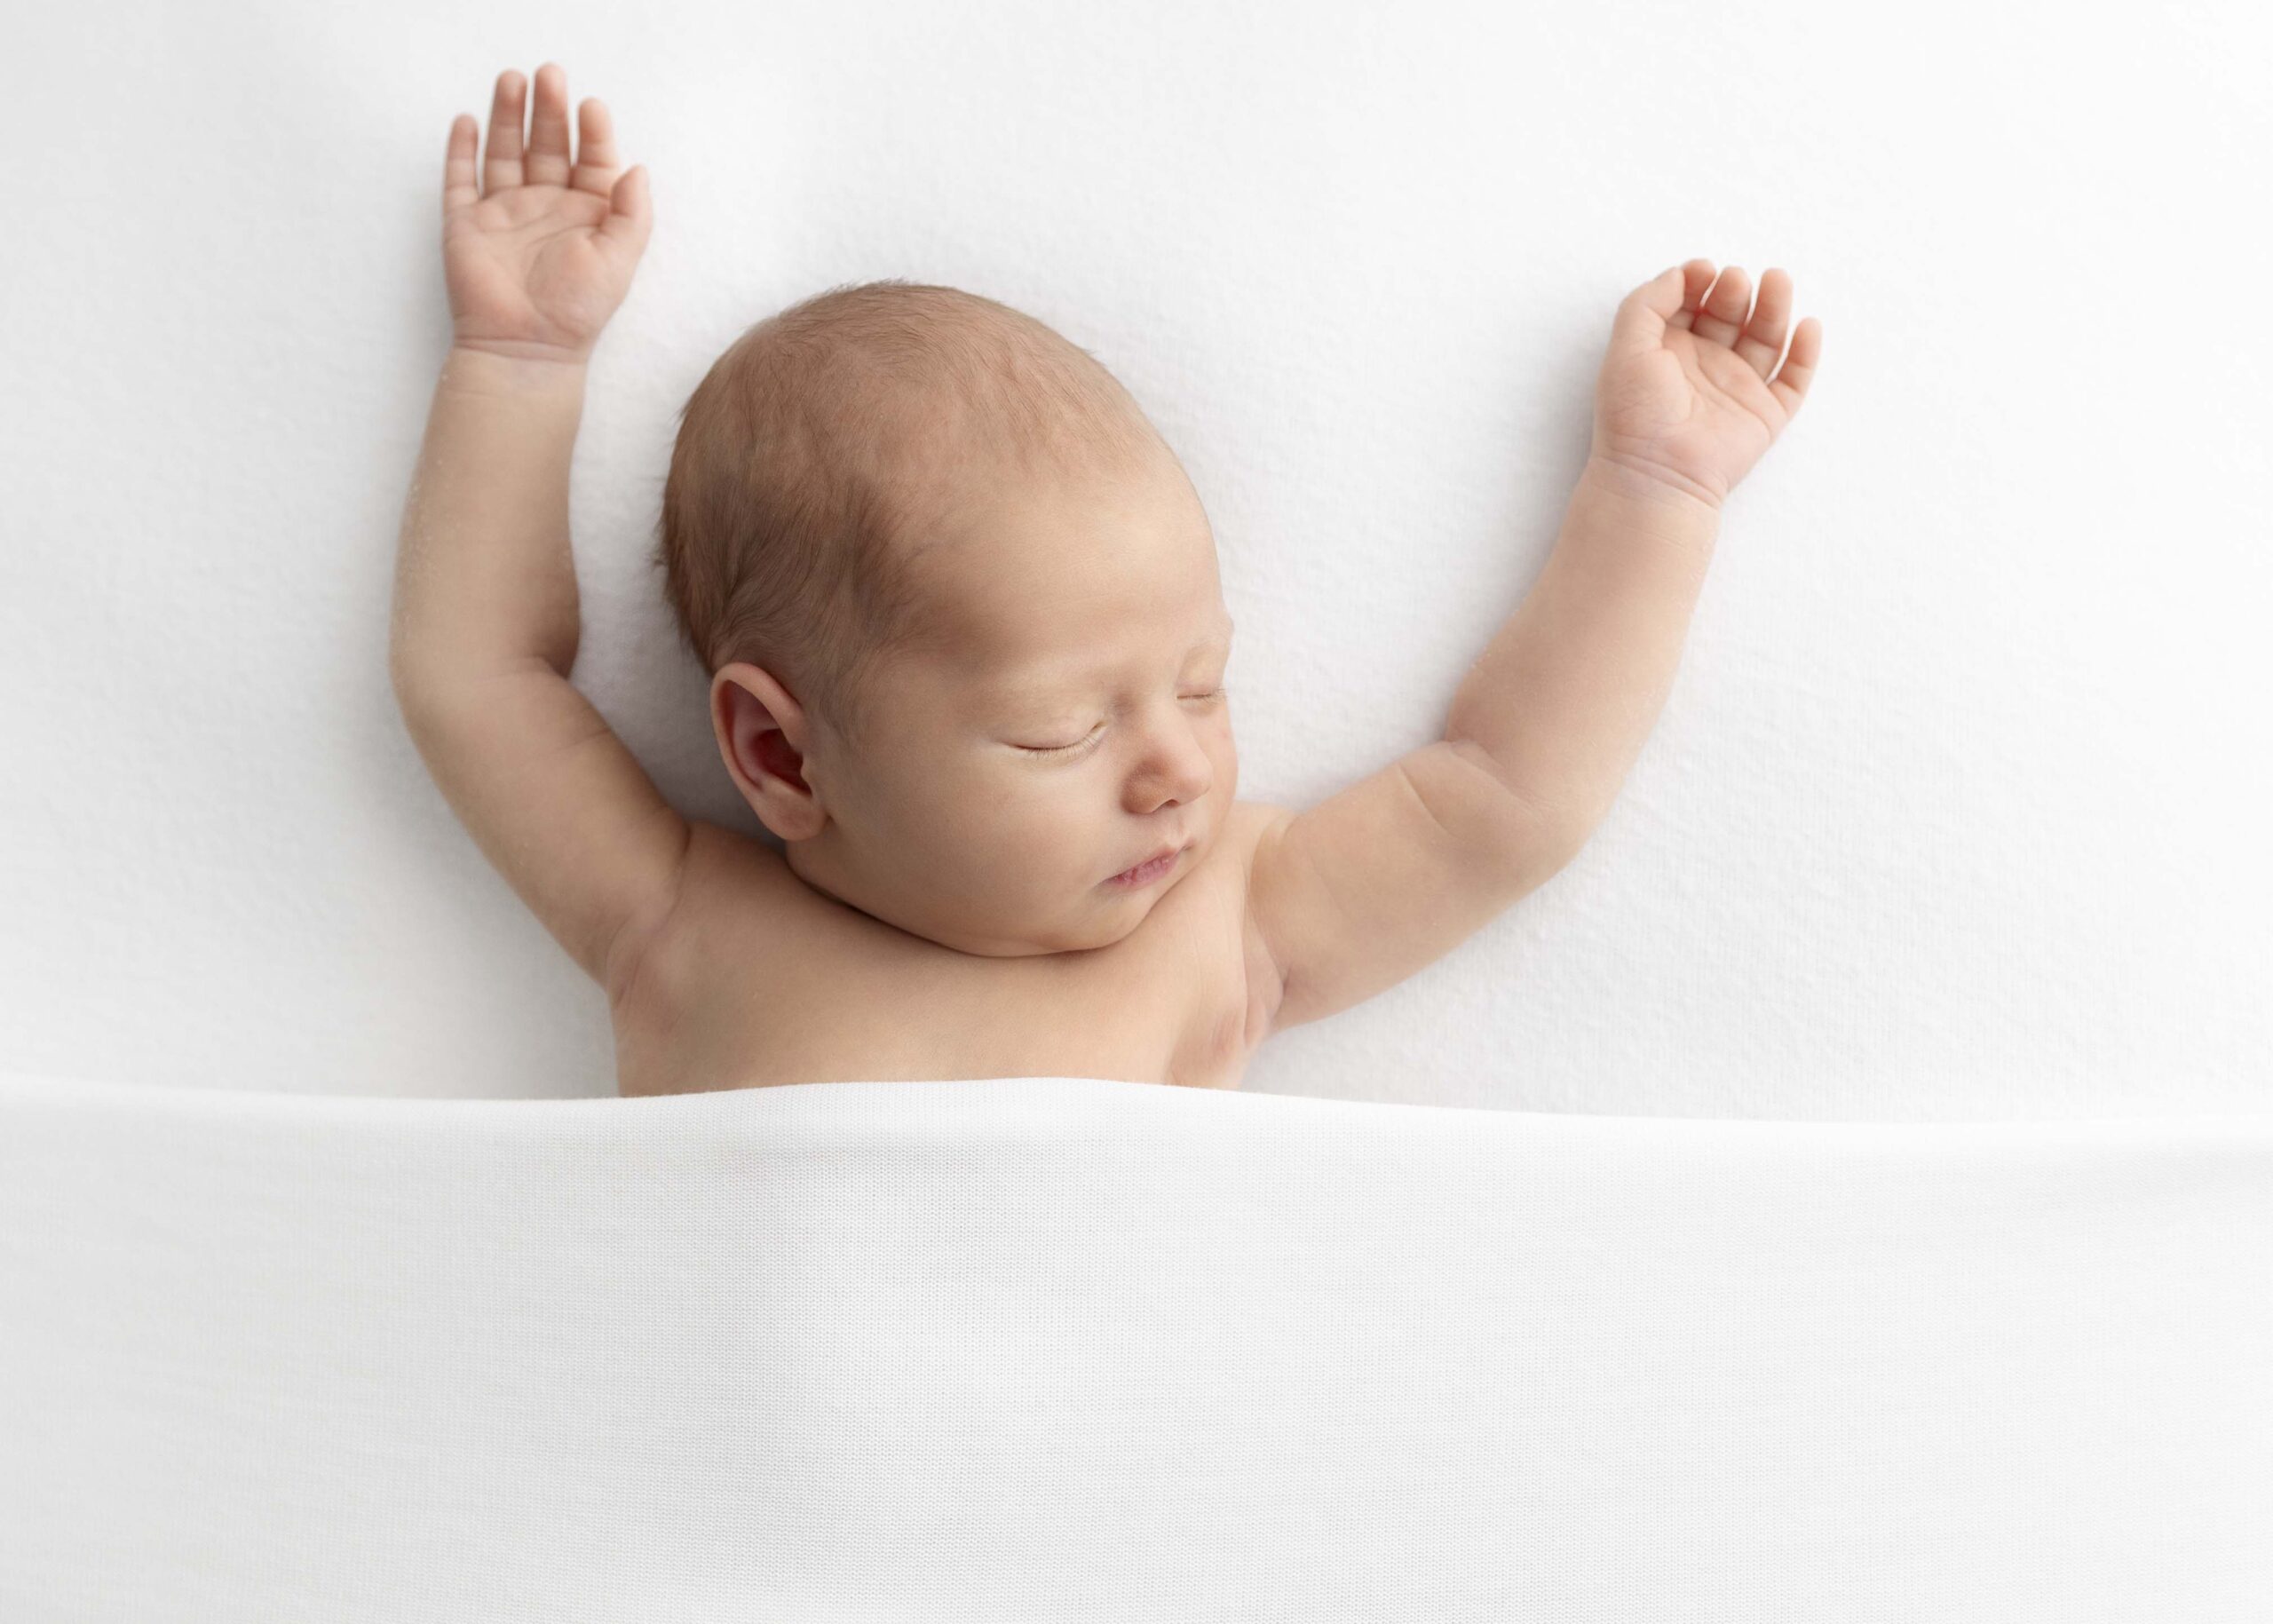 newborn baby under white blanket with arms outstretched